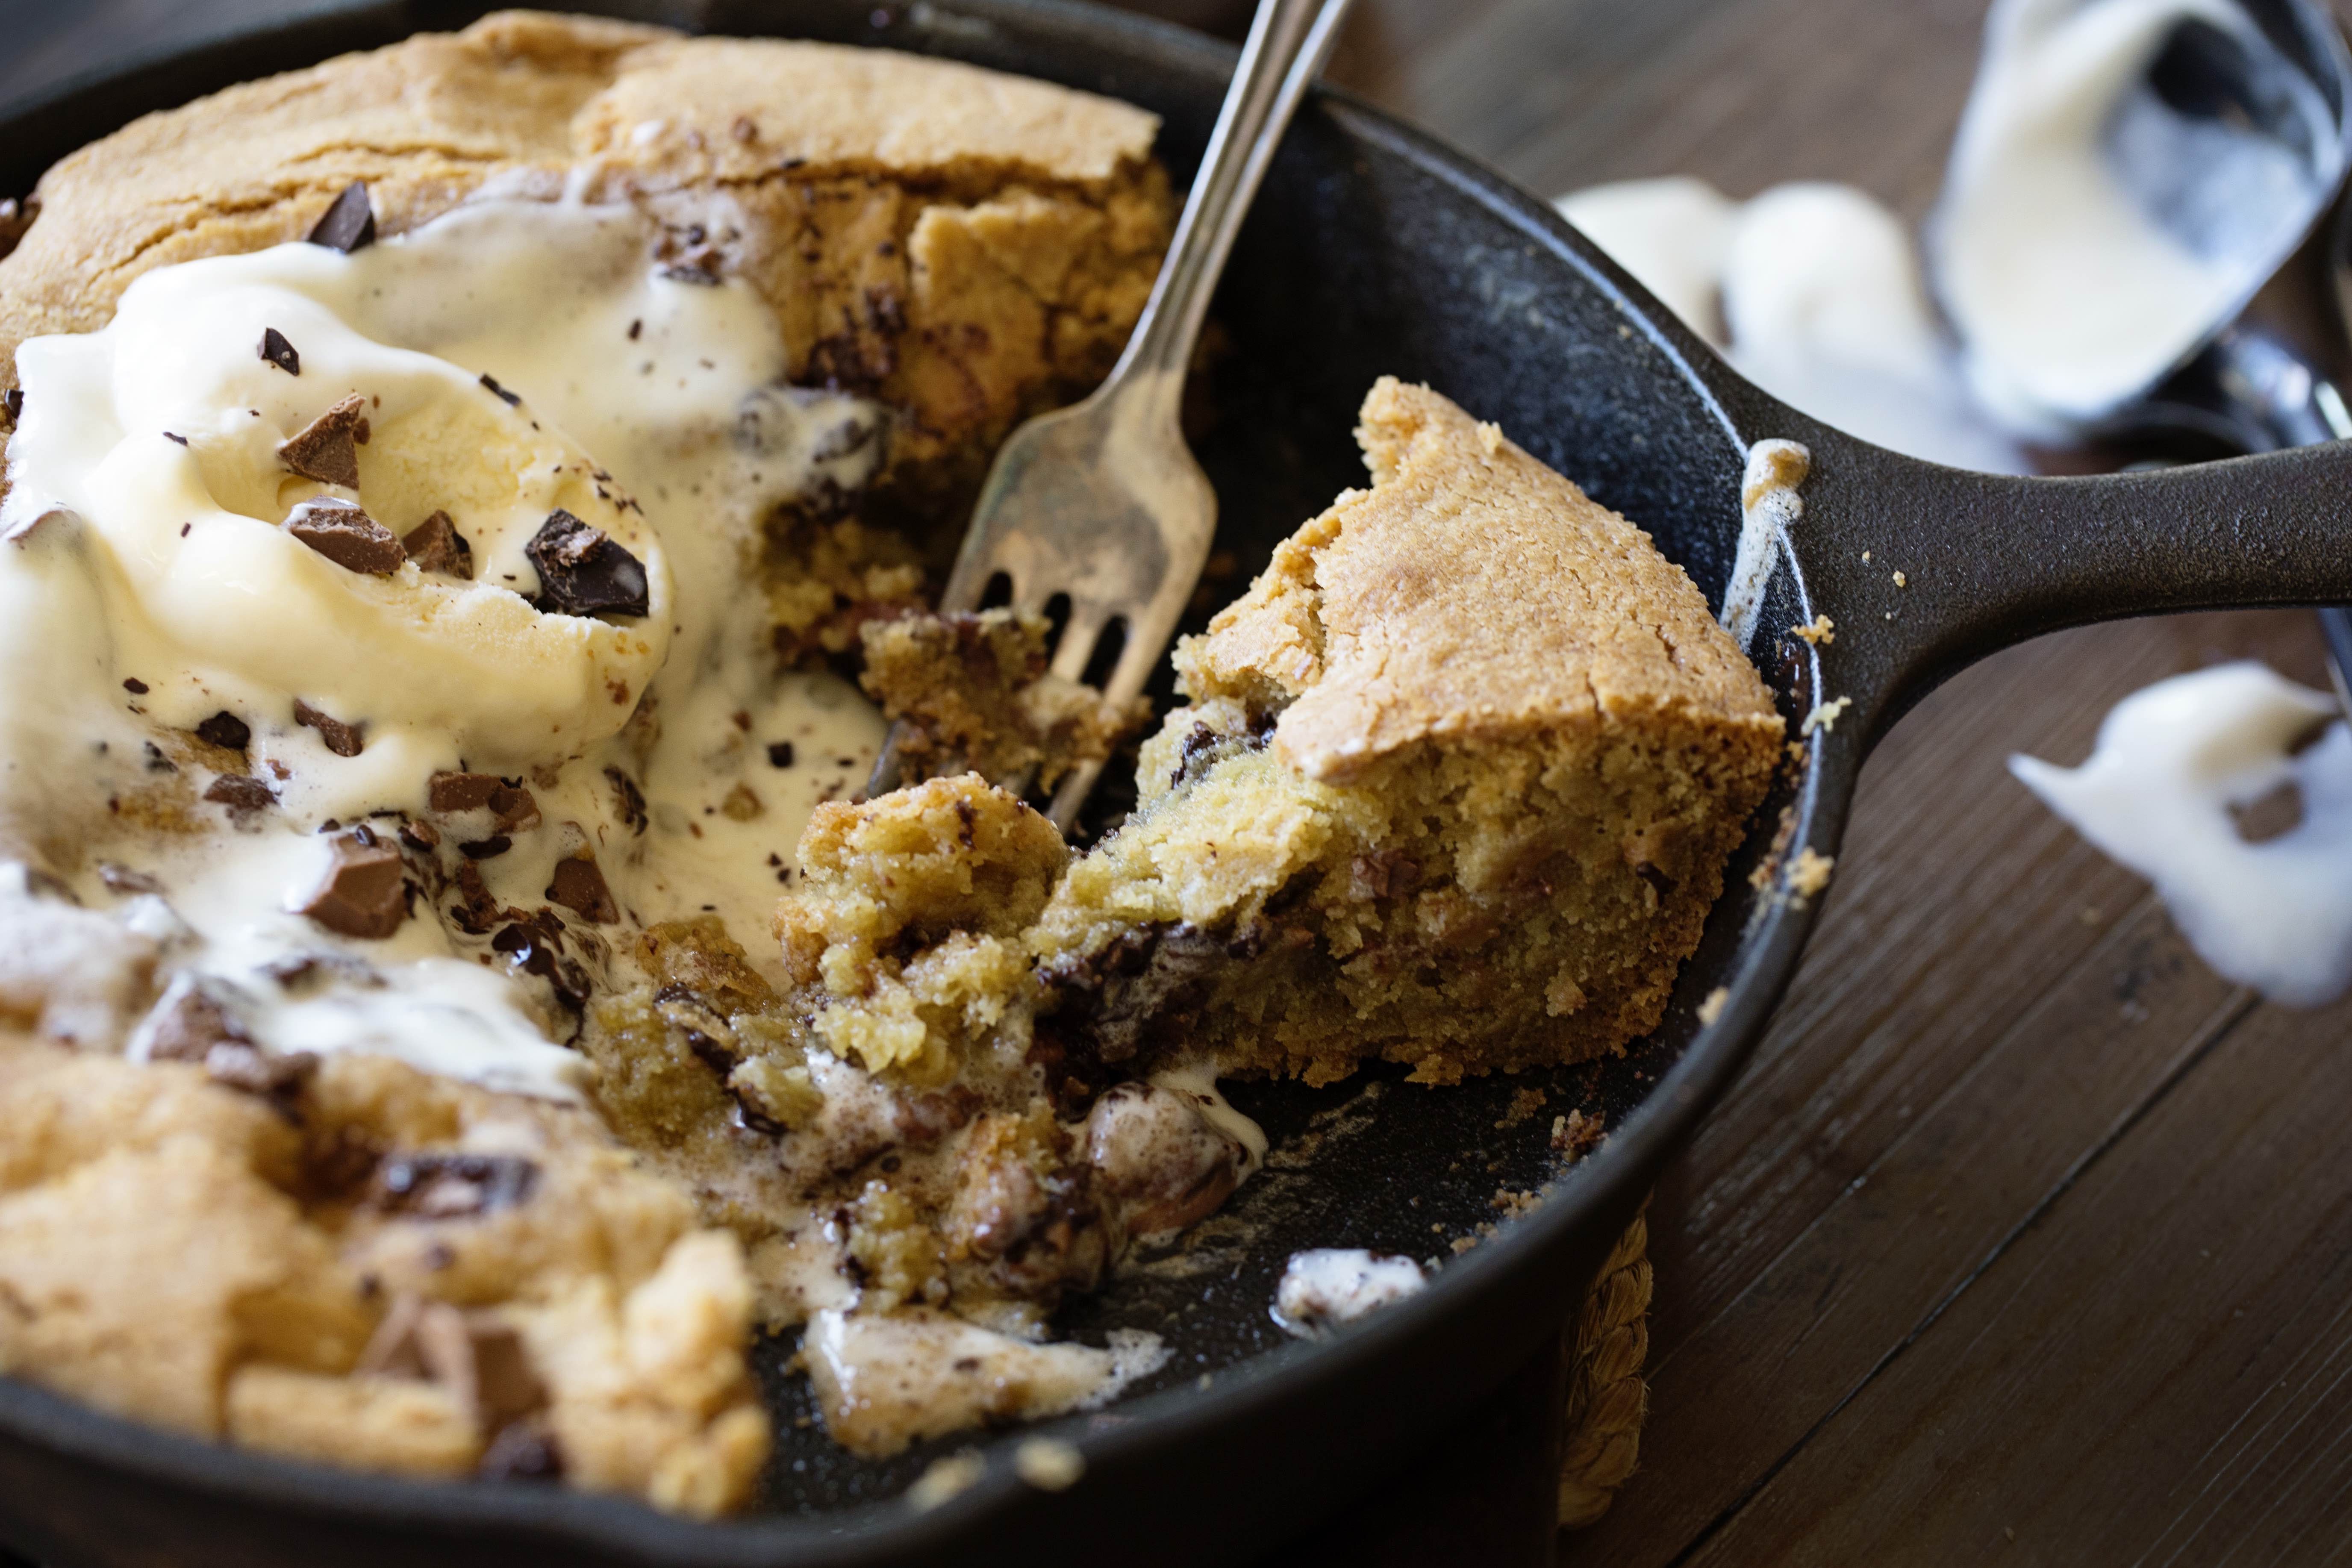 https://theinspiredhome.com/wp-content/uploads/2023/02/Skillet-Cookie-2-resize.jpg